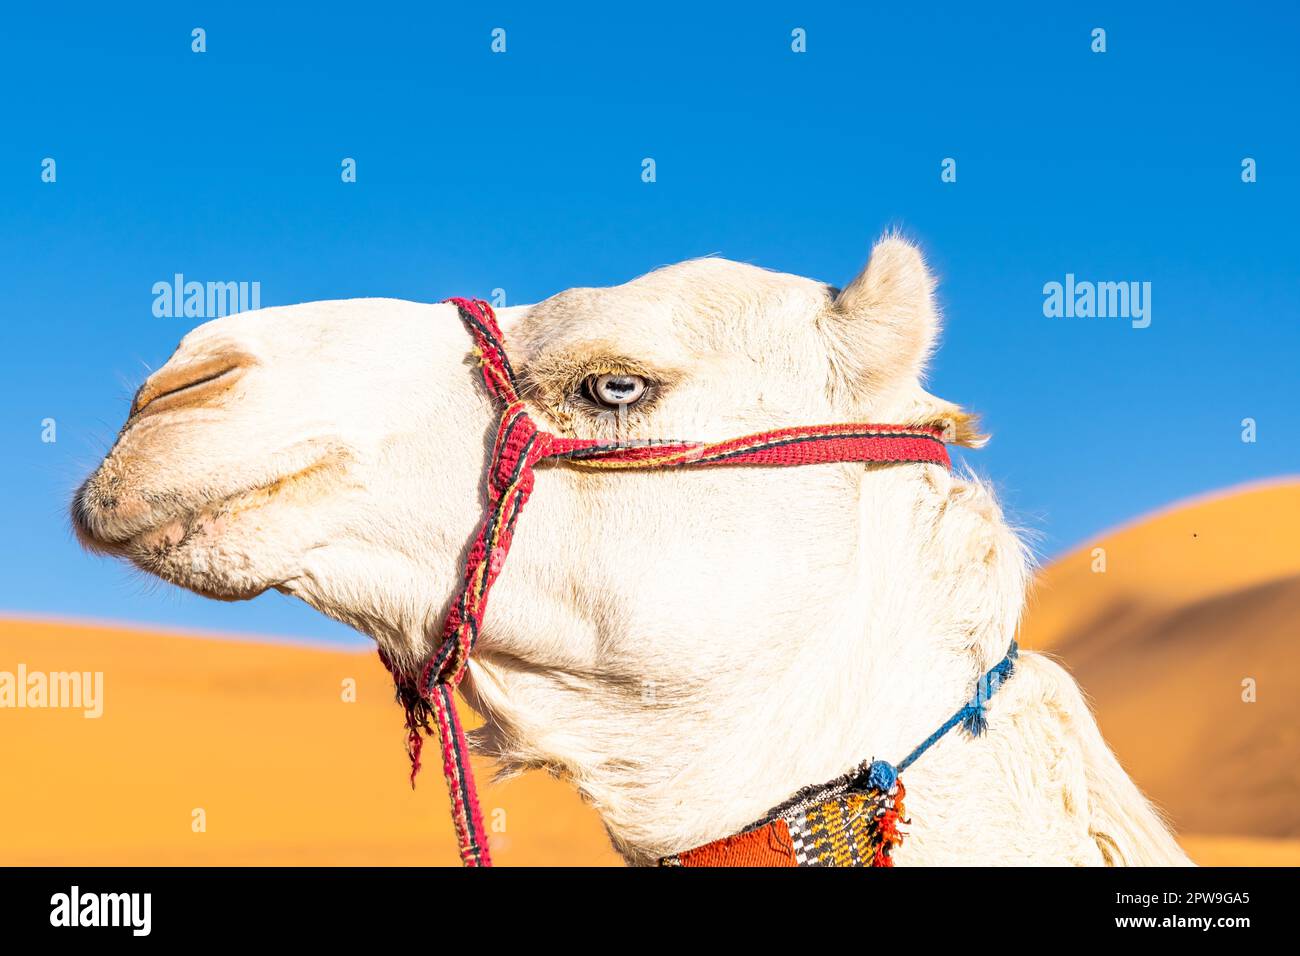 Blue eyed white dromedary camel. Side profile  head shot portrait in a low angle view on the Sahara Desert of Taghit, Algeria with a blurred orange co Stock Photo